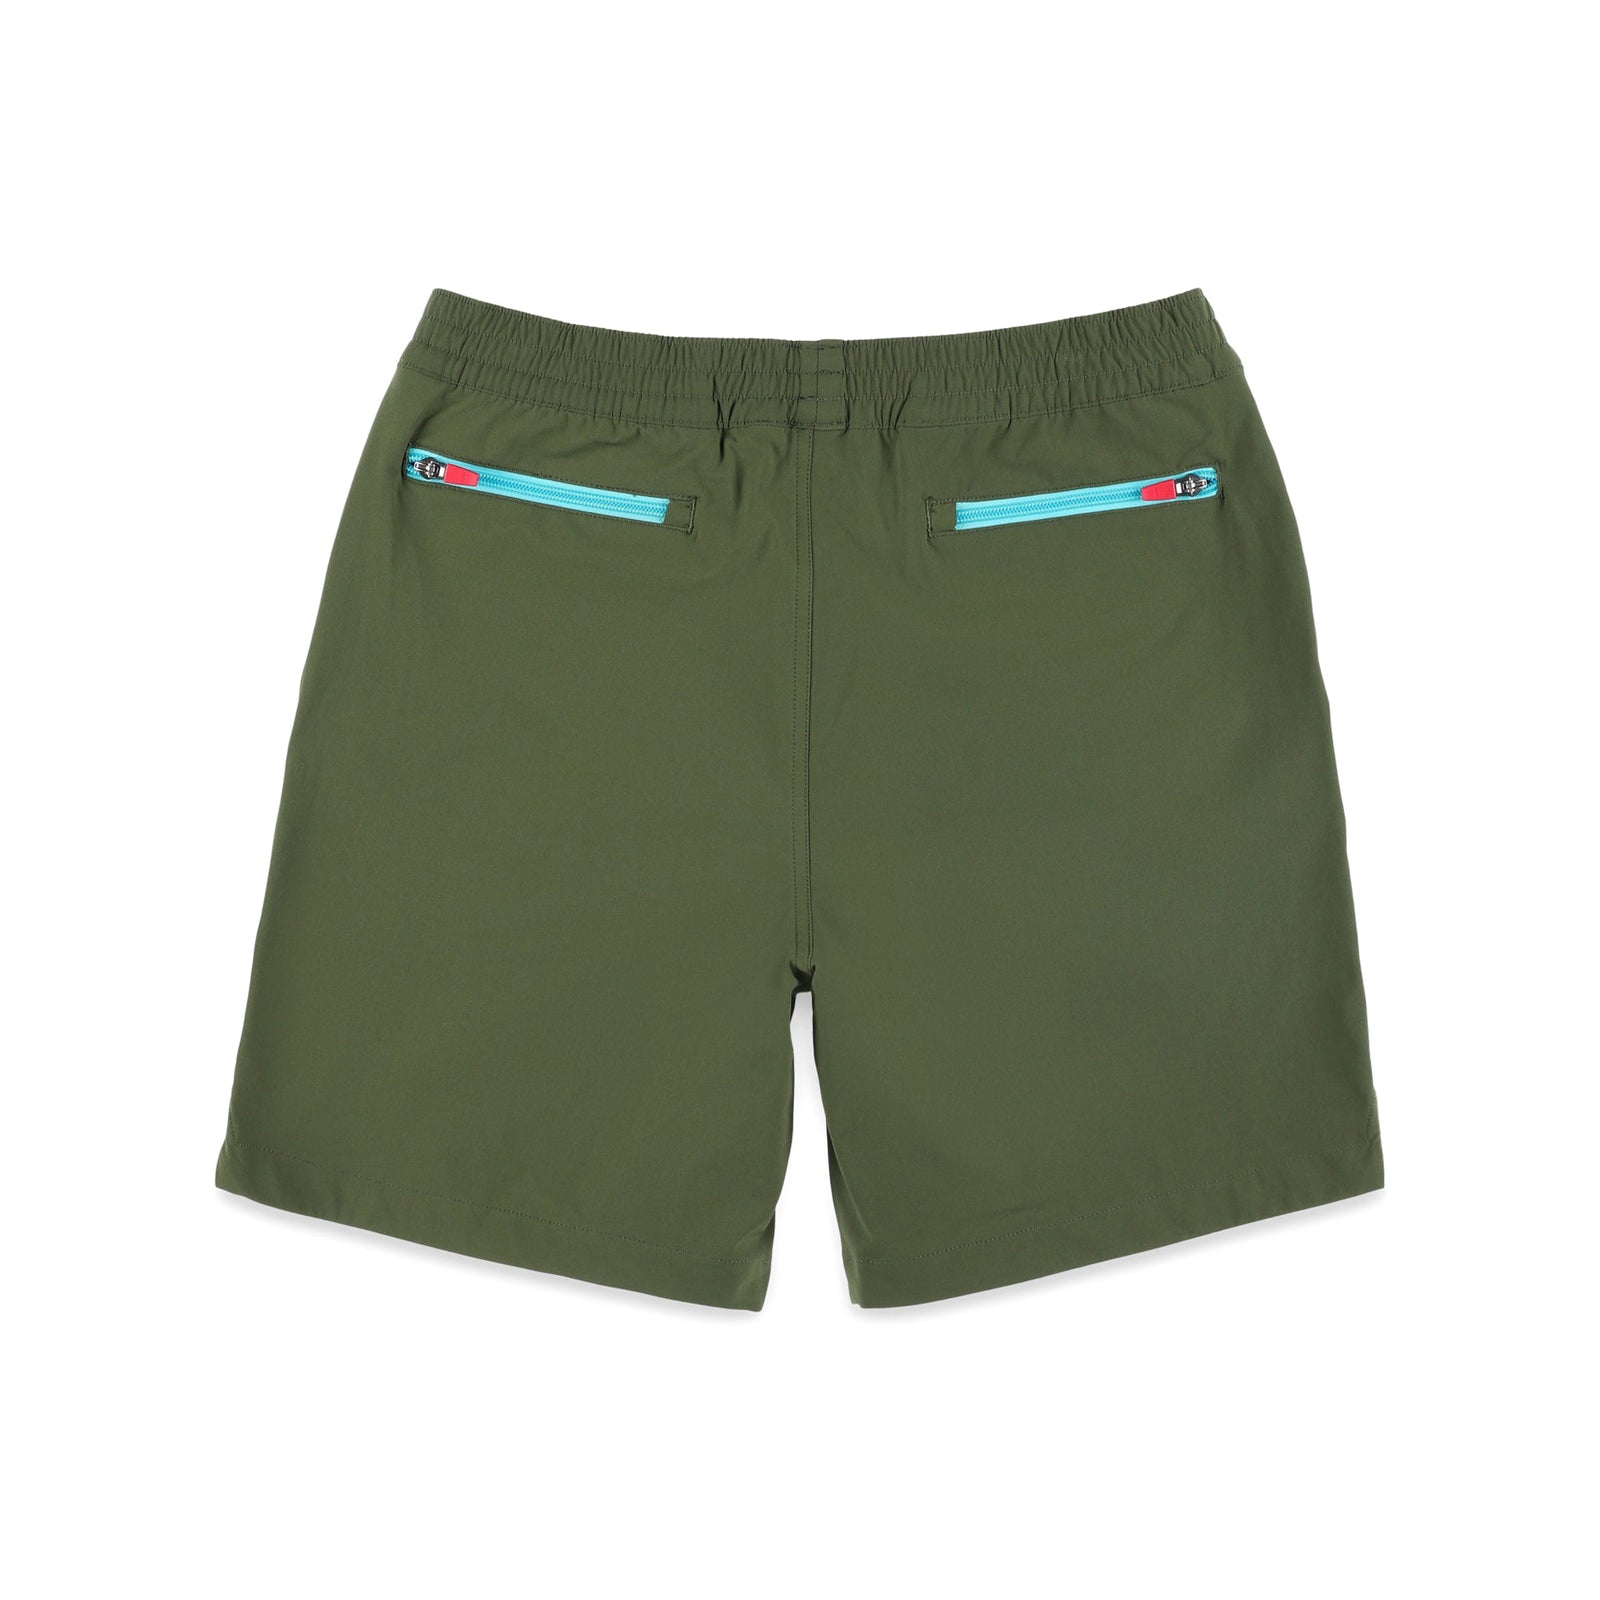 Back zipper pockets on Topo Designs Men's Global lightweight quick dry travel Shorts in "Olive" green.